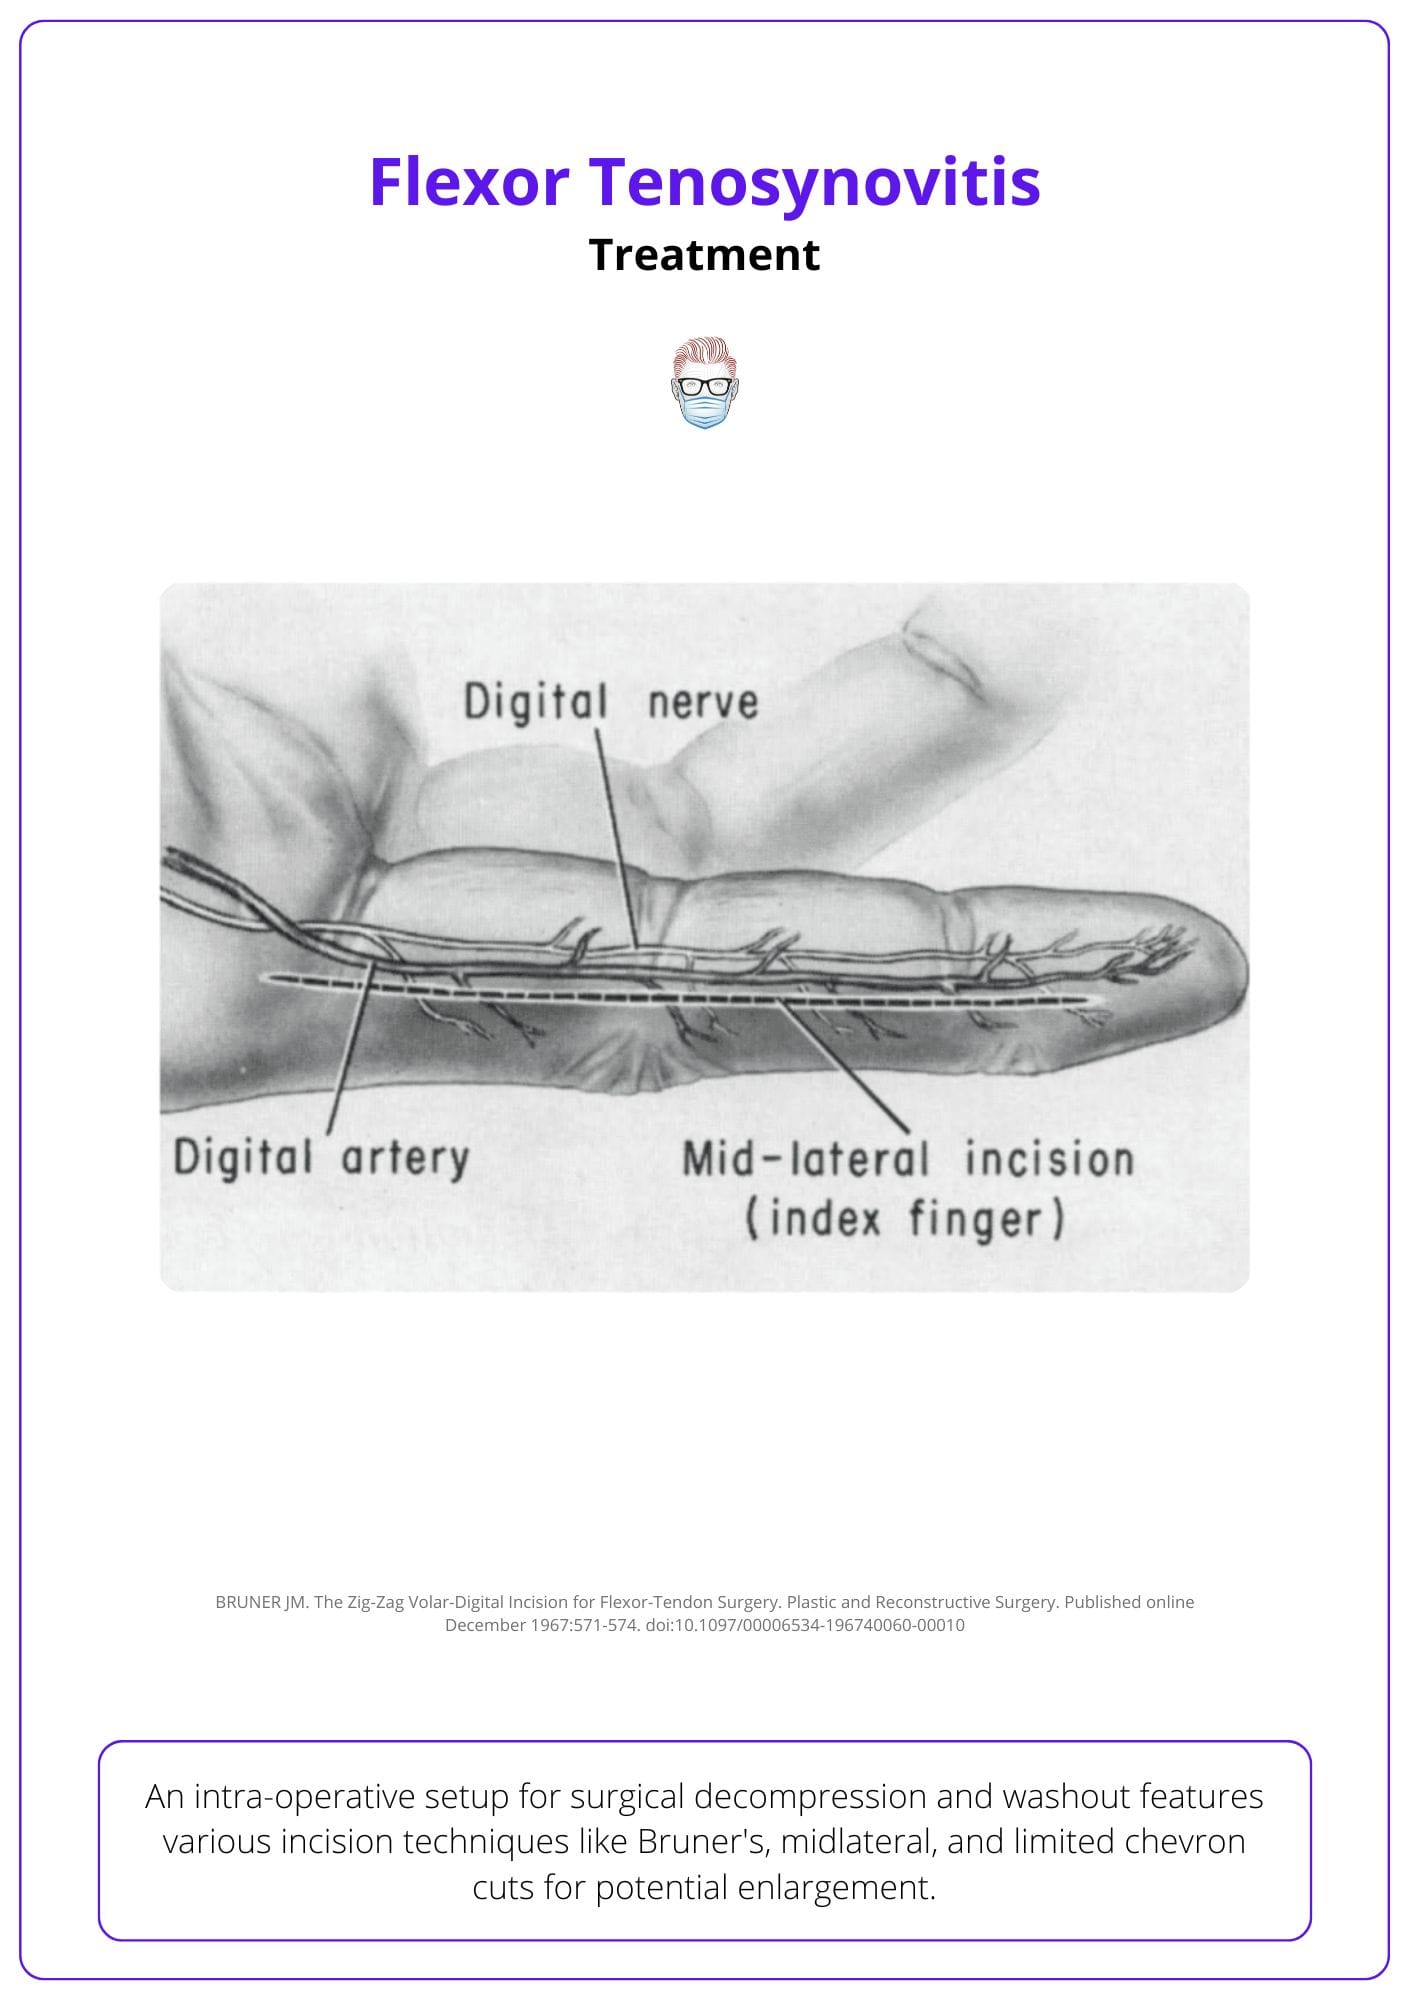 Image of mid-lateral incision and markings of various incision options.